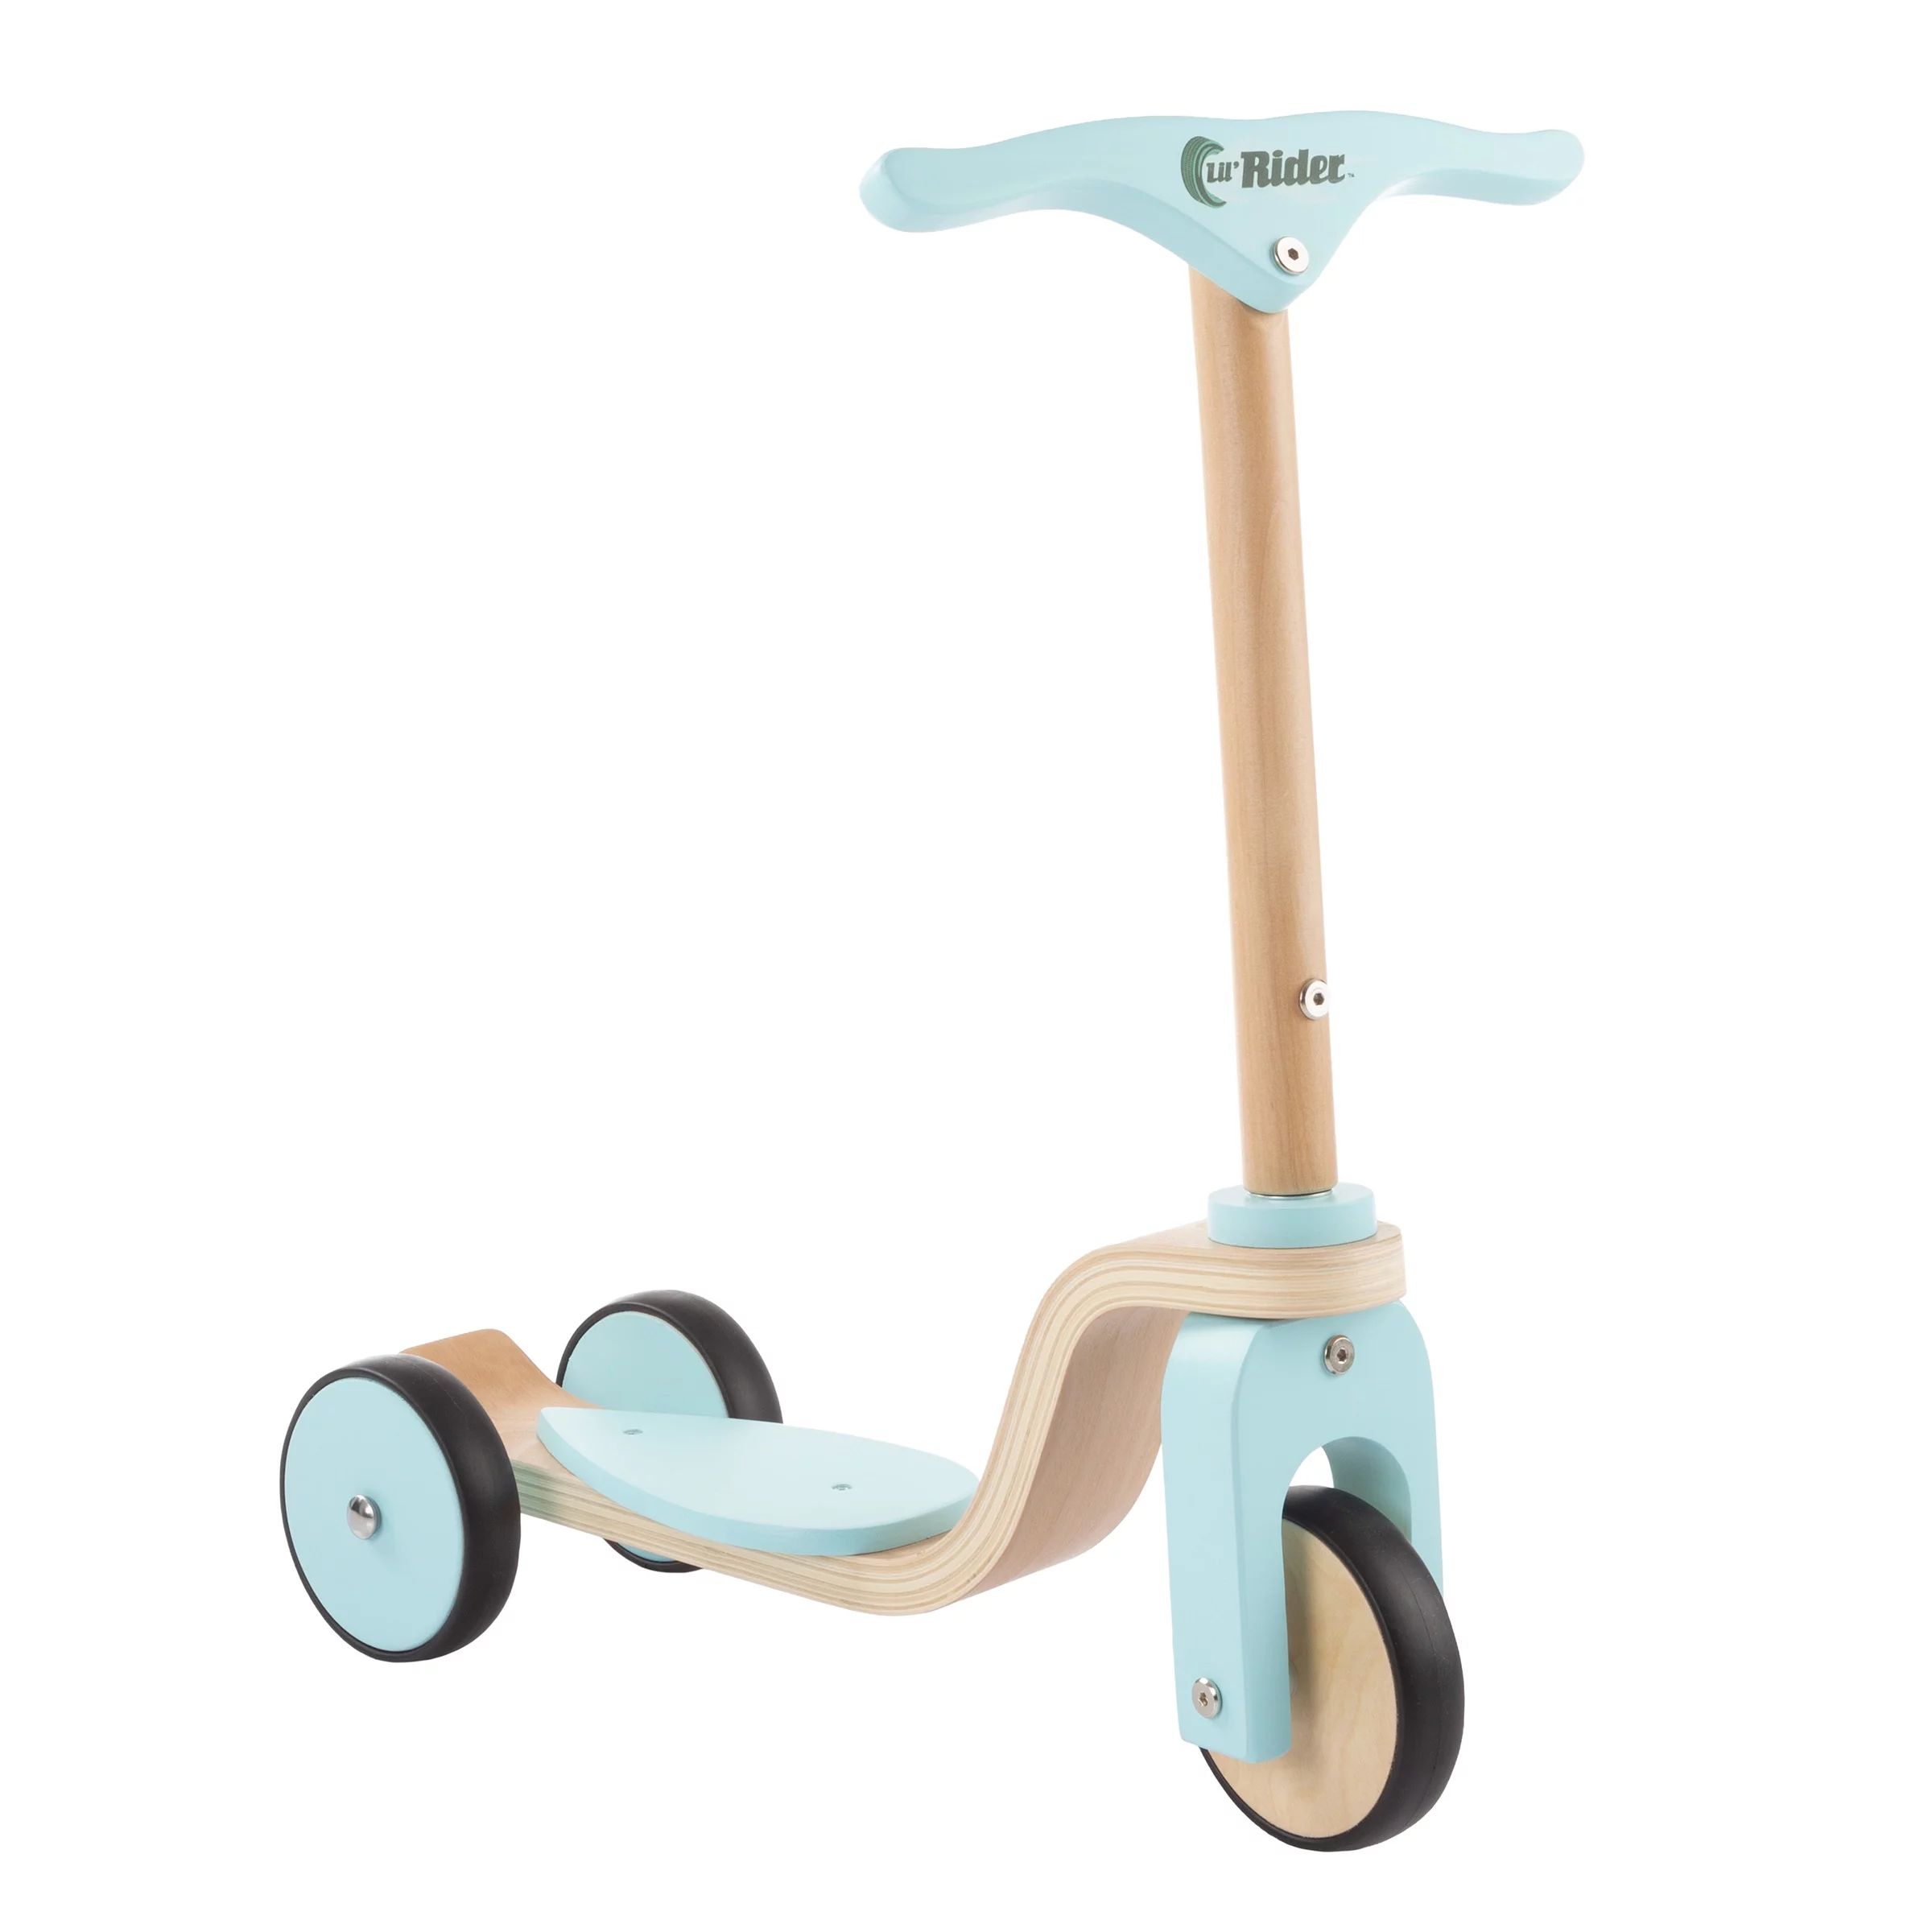 Kids Wooden 3 Wheel Scooter-Fun Balance and Coordination Riding Toy for Girls and Boys by Lil’ ... | Walmart (US)